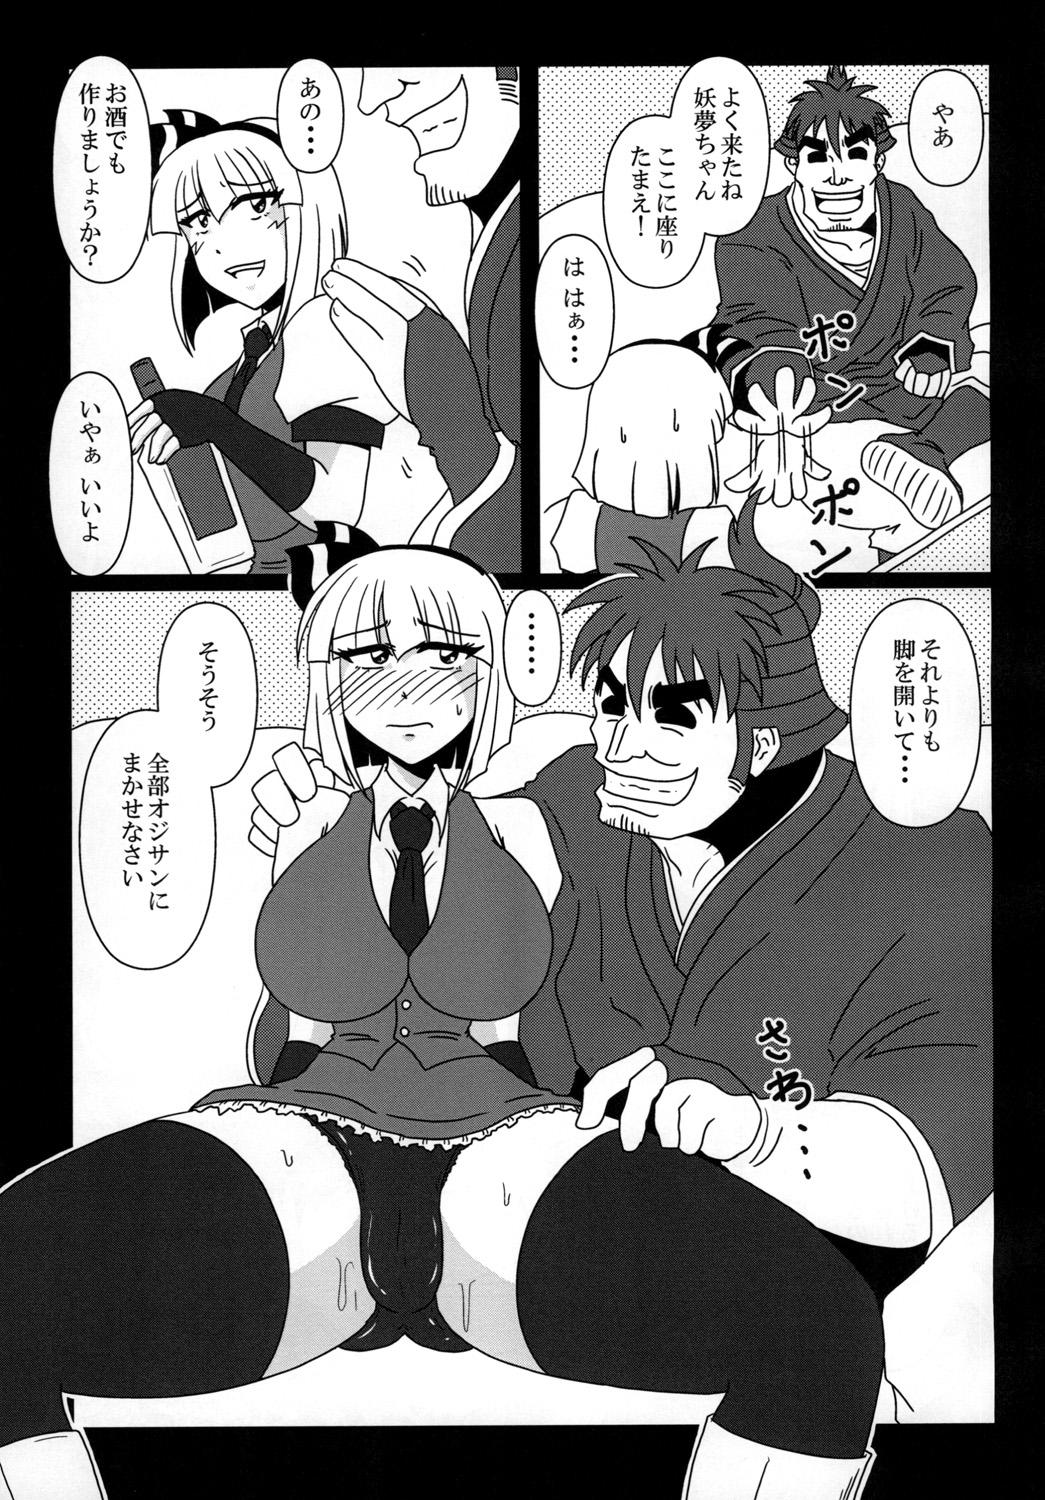 Dotado 魂魄妖夢バイトやらされてます! - Touhou project Rough Sex - Page 11